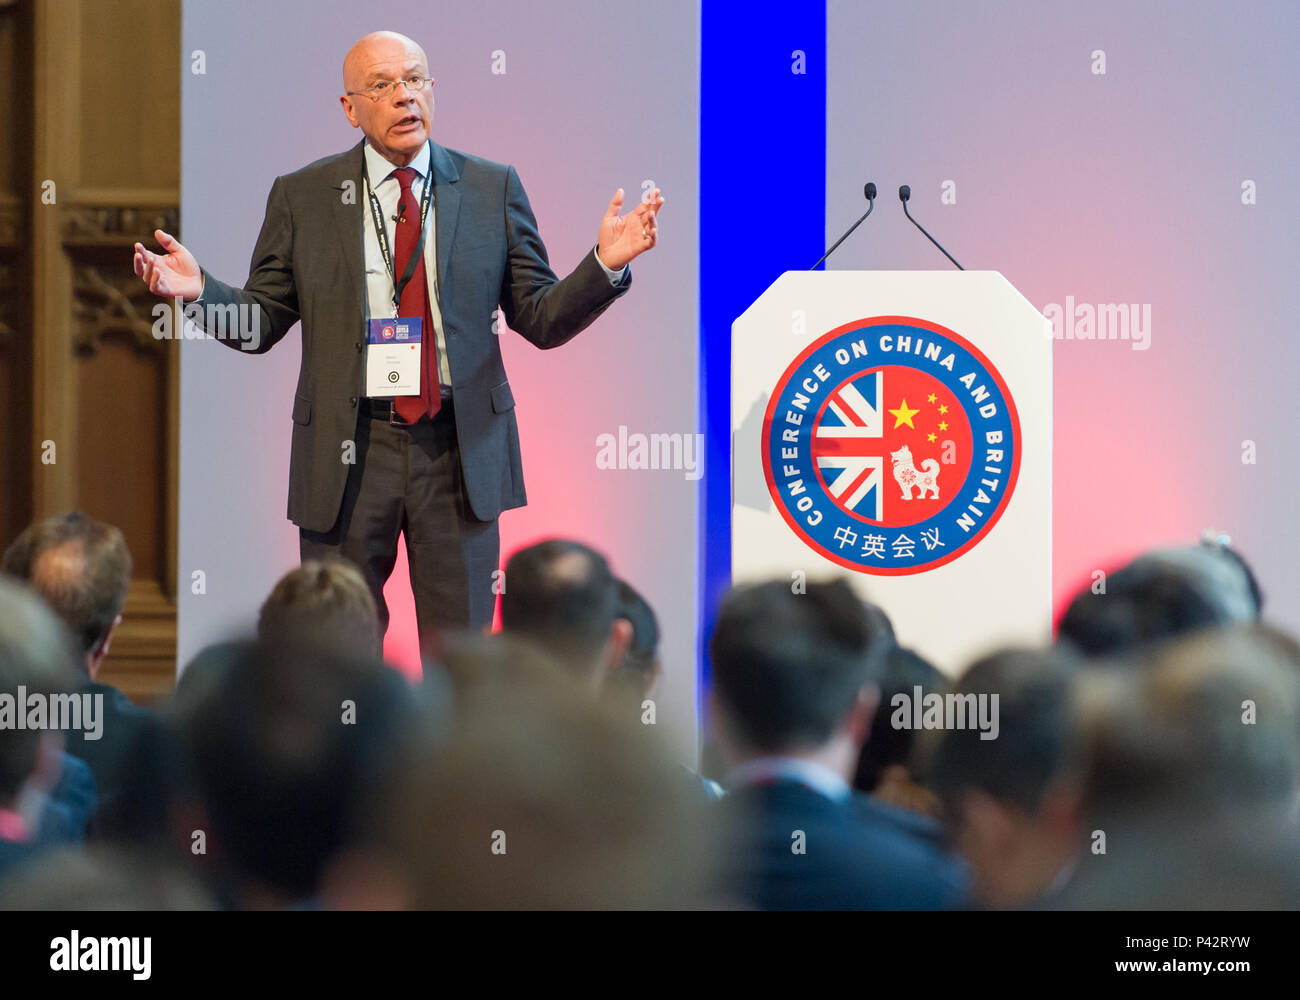 London, Greater London, UK. 19th June, 2018. Martin Jacques, Author and Academic, during his intervention at the Margaret Thatcher Conference on China and Britain at Guildhall. Credit: Gustavo Valiente/SOPA Images/ZUMA Wire/Alamy Live News Stock Photo